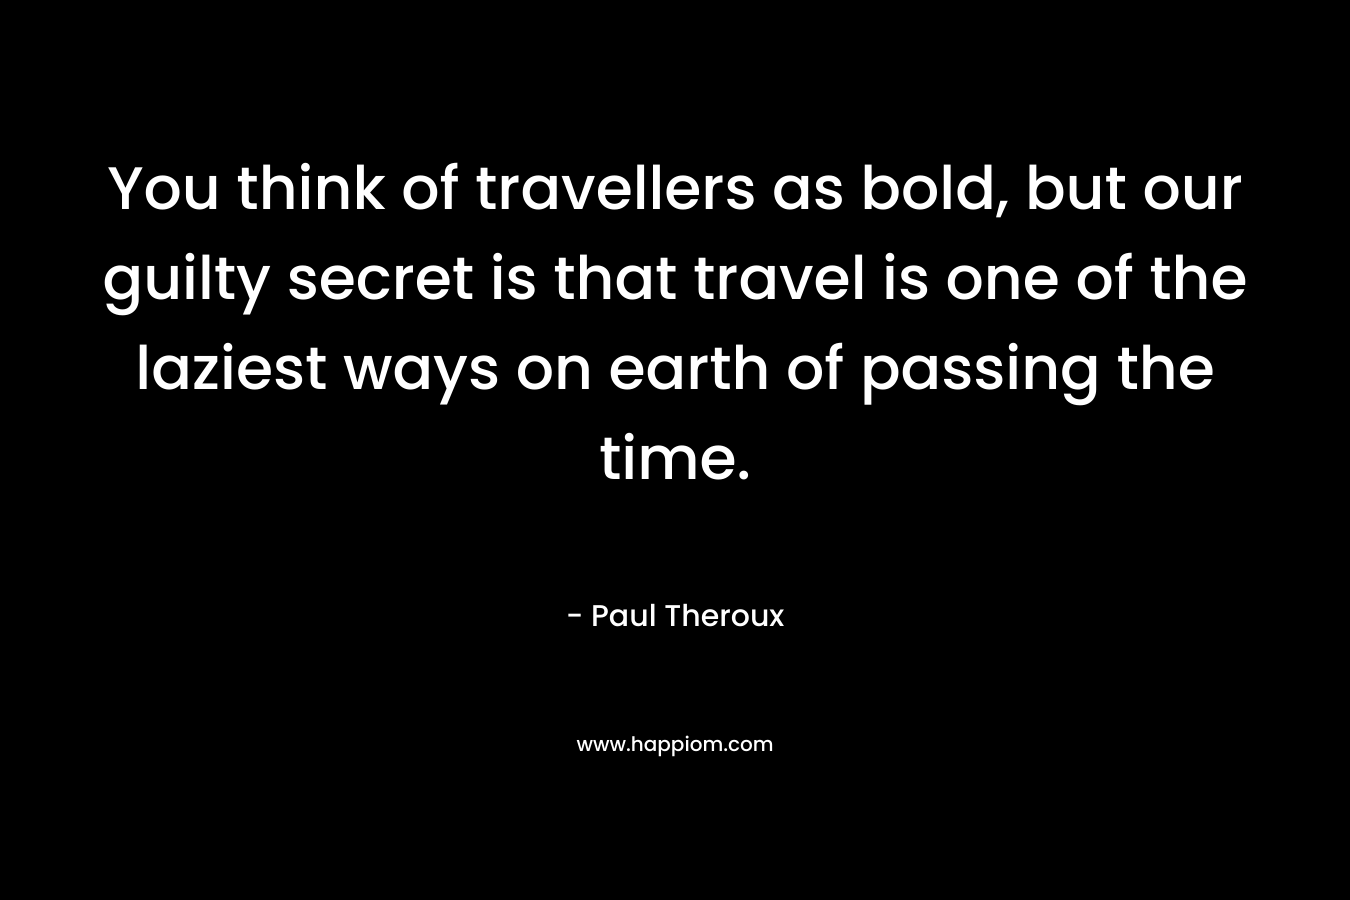 You think of travellers as bold, but our guilty secret is that travel is one of the laziest ways on earth of passing the time. – Paul Theroux